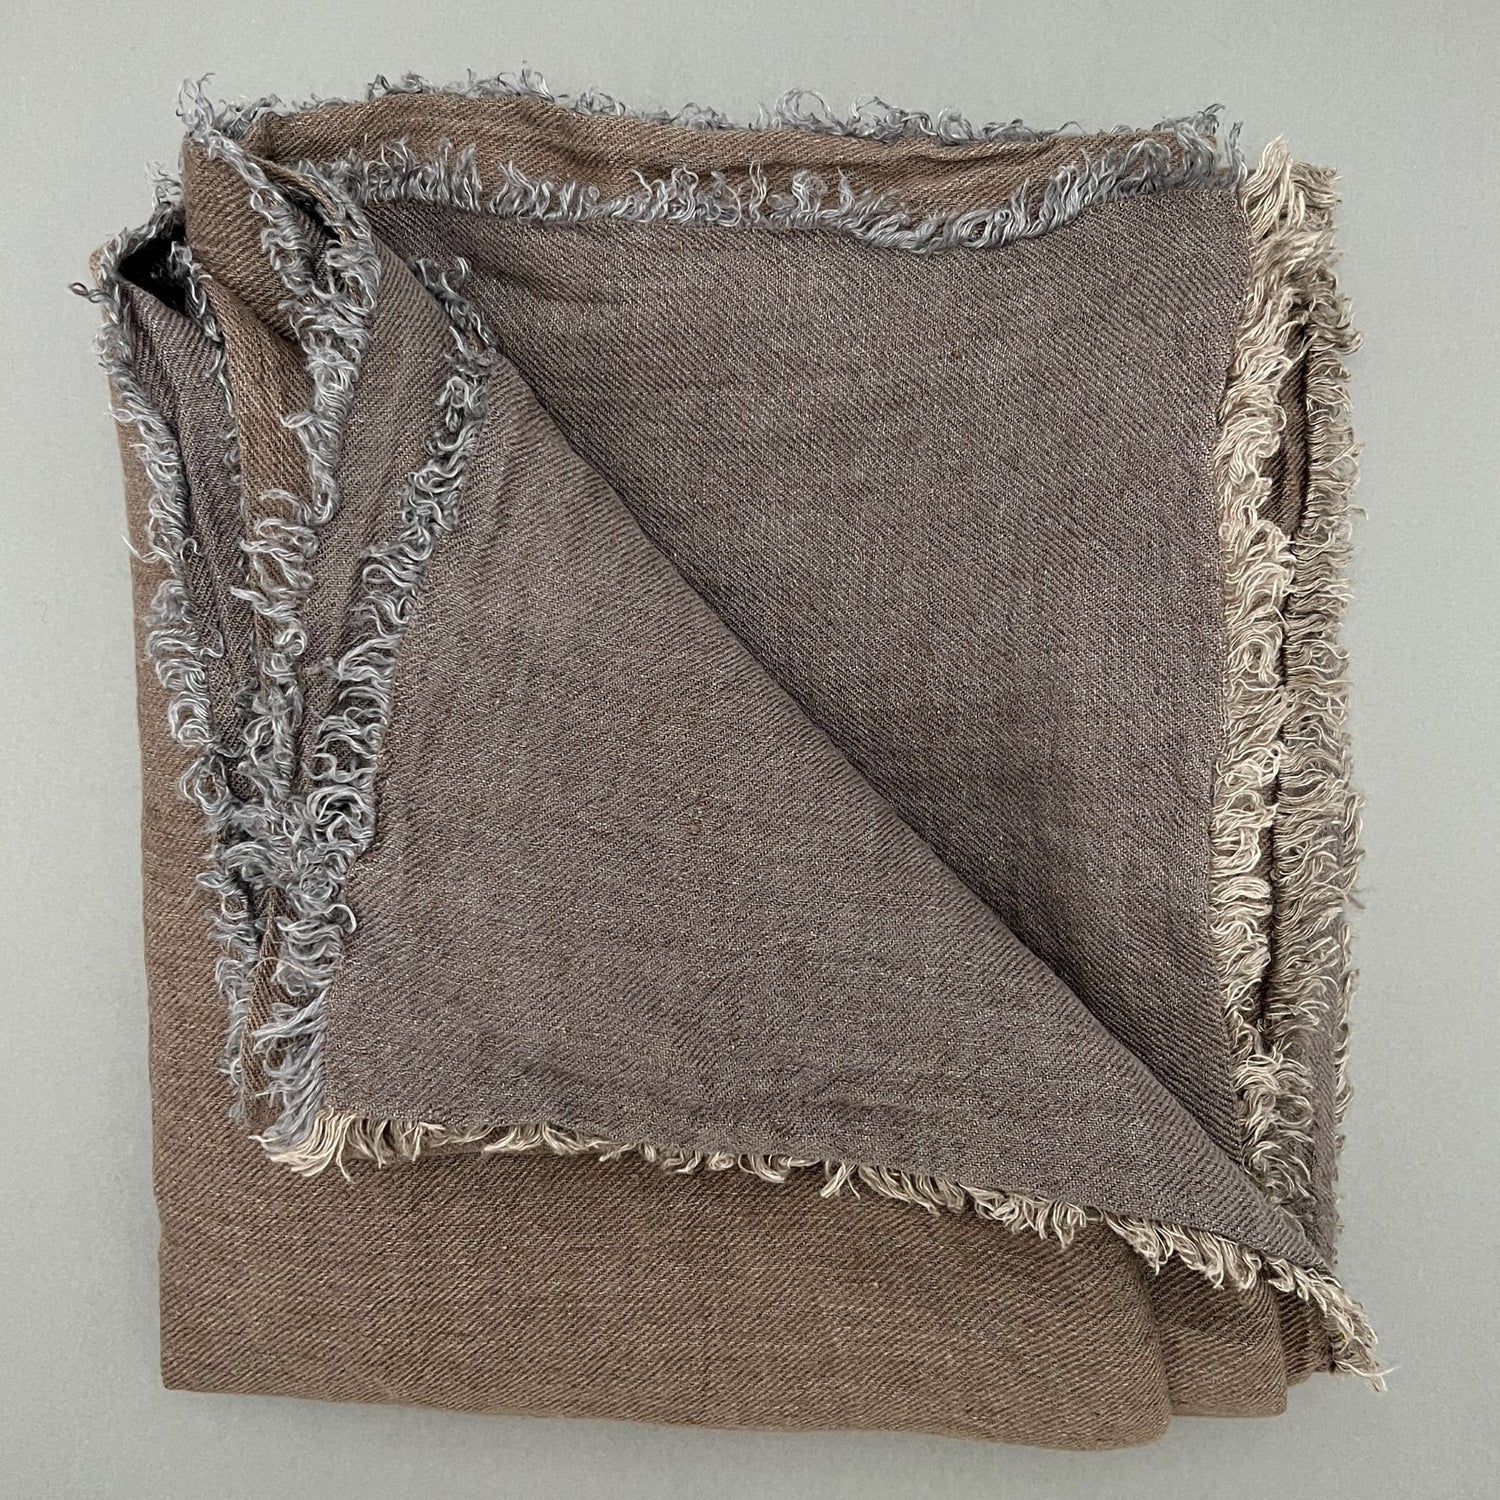 A grey/brown scarf made out of linen laying folded on a gray background